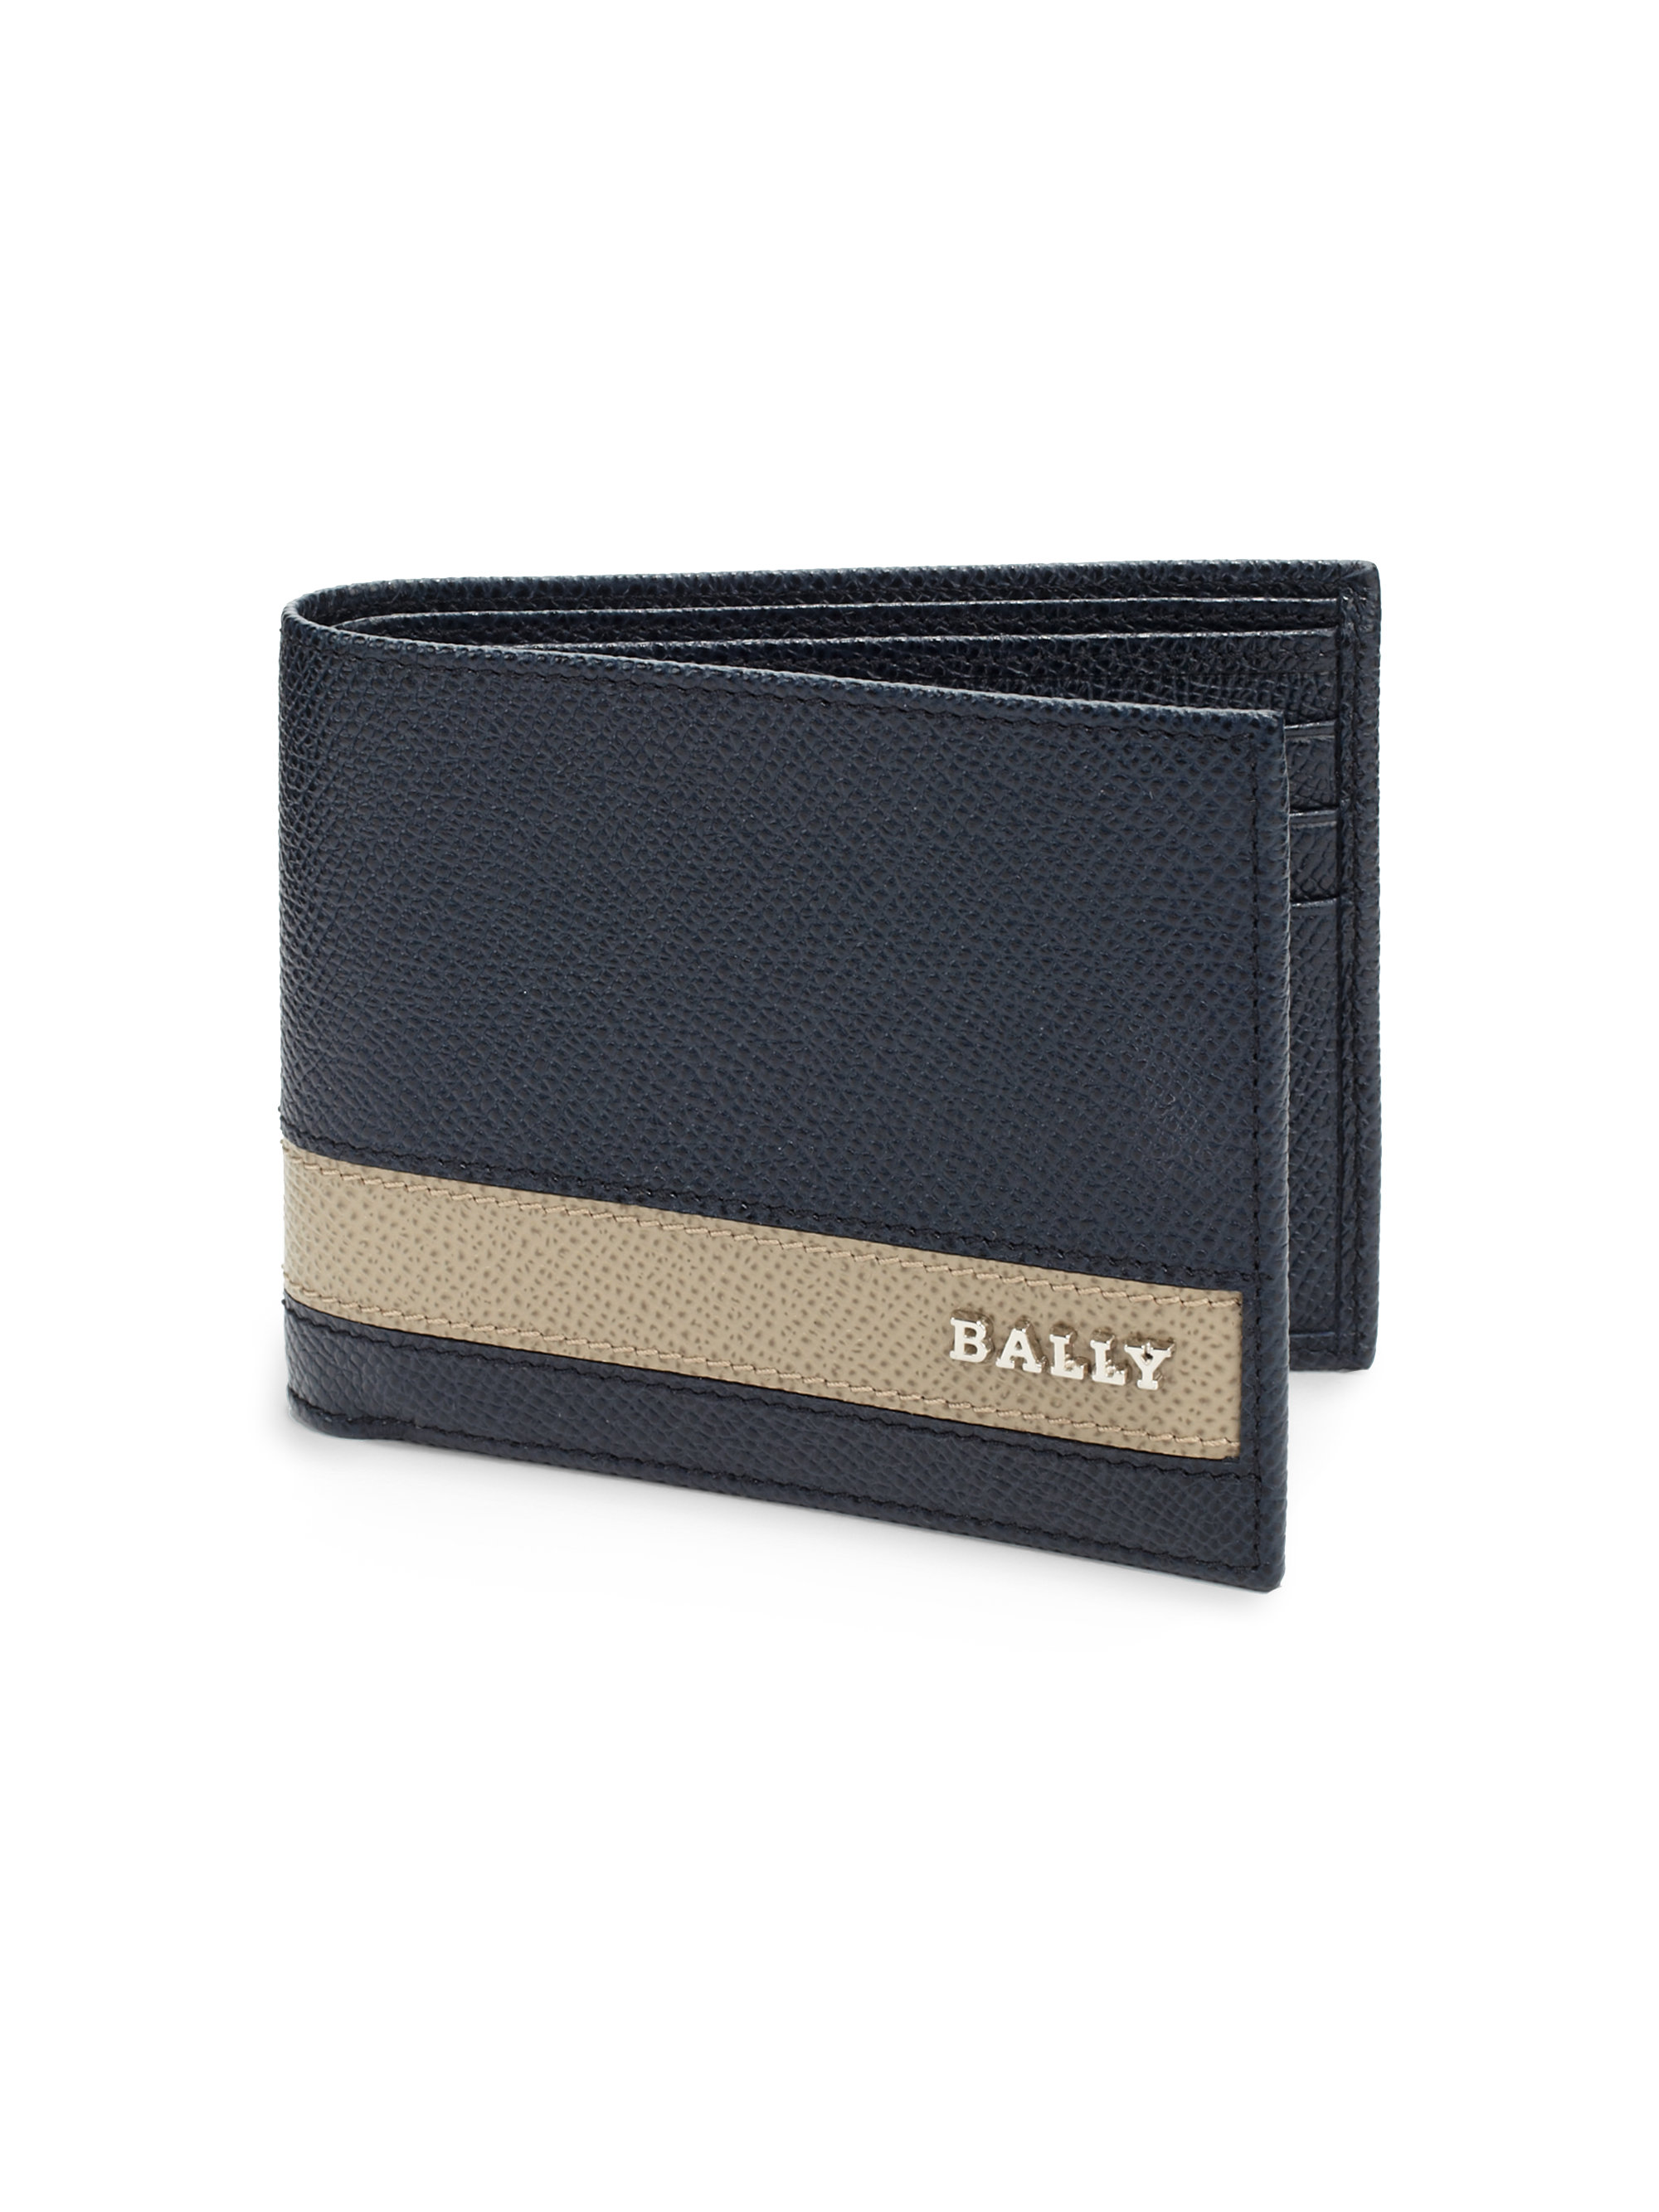 Lyst - Bally Leather Bifold Wallet in Blue for Men